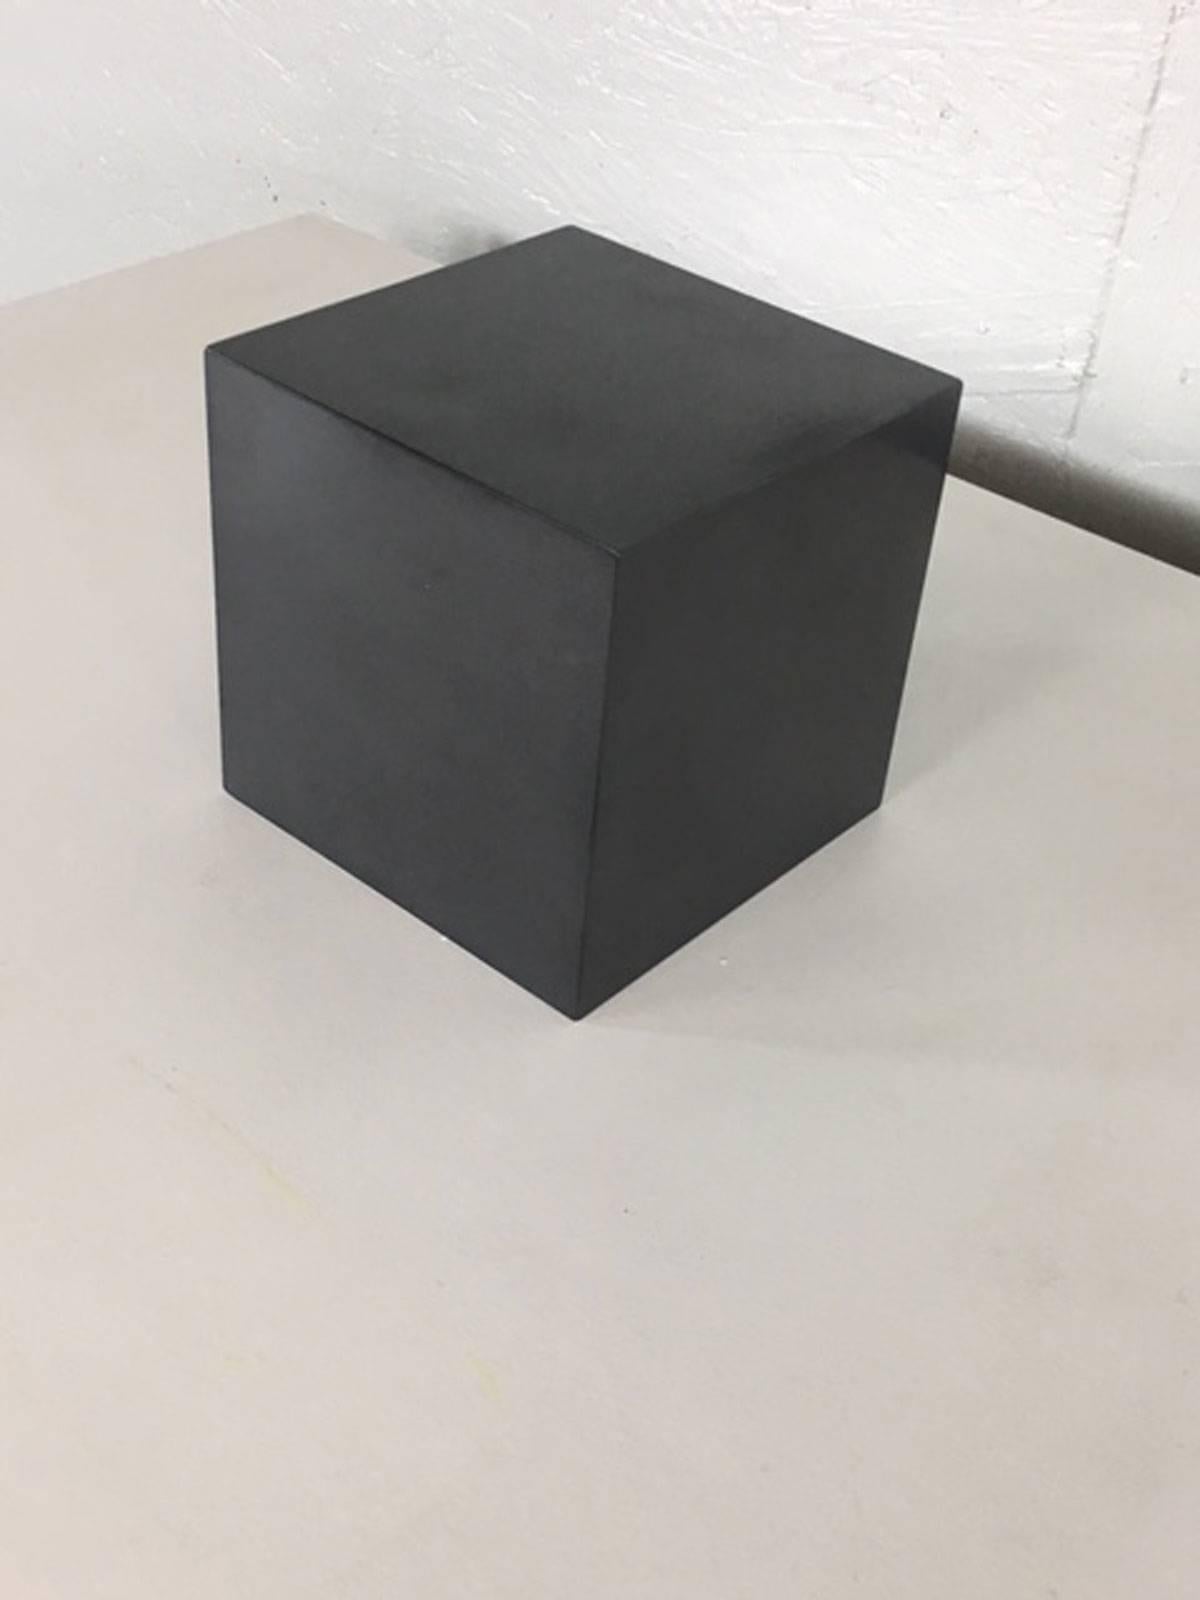 Extraordinary graphite aluminium cube by Susan York for wall display, circa 2000s. Quite heavy. Substantial. Thought provoking piece.